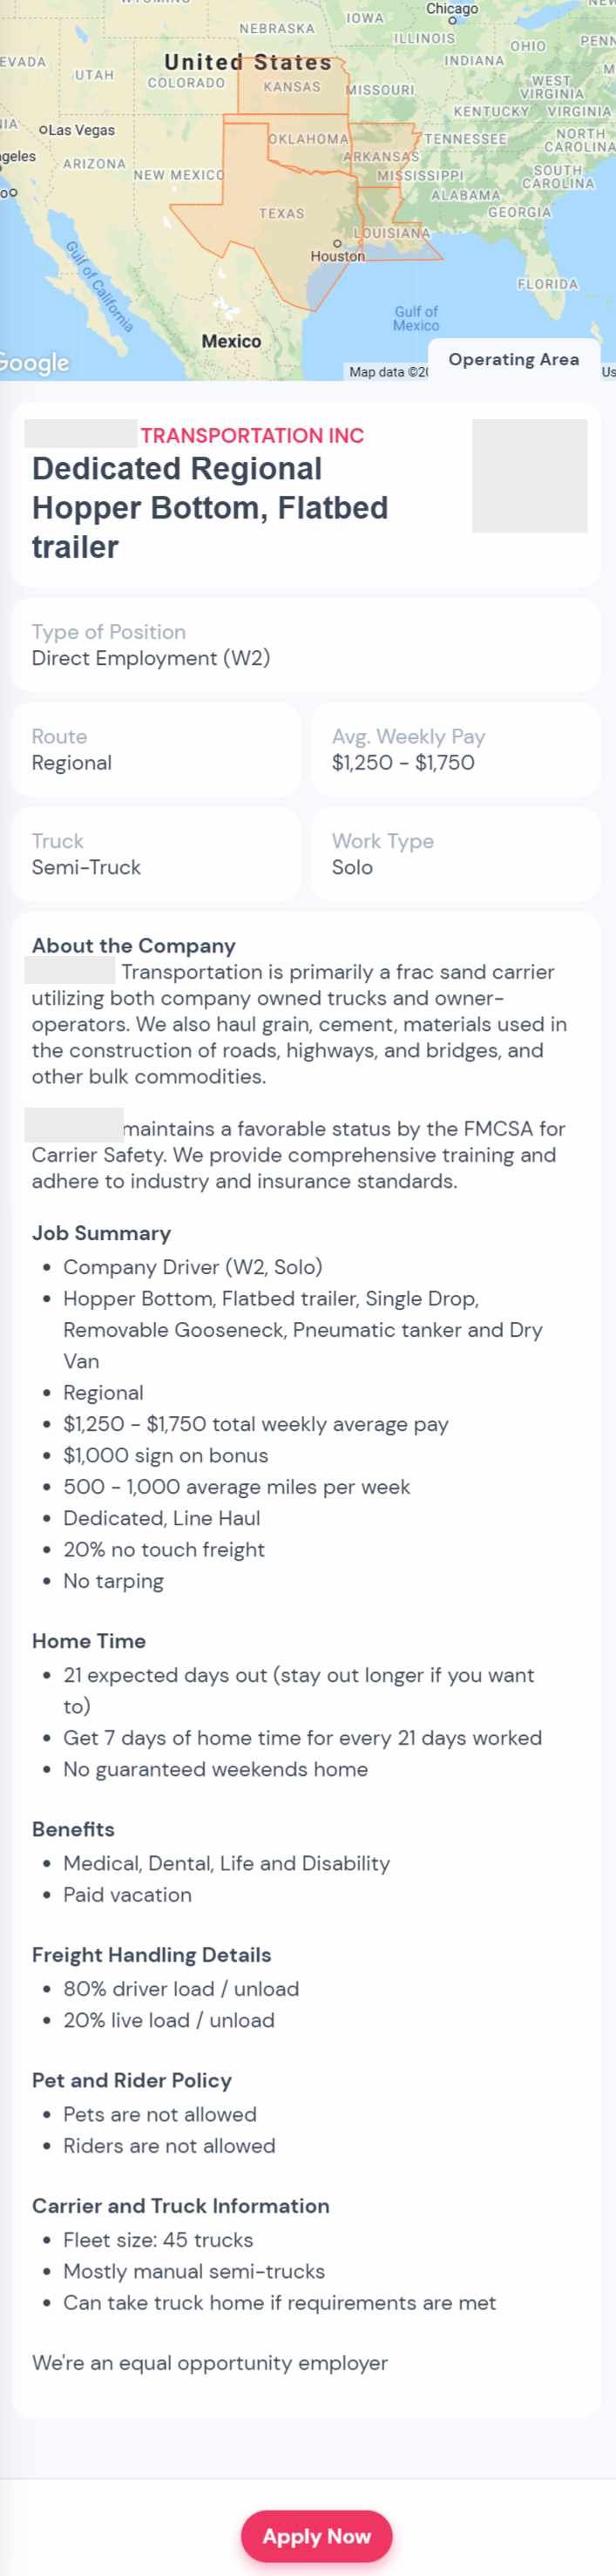 image of a good trucking job ad on Lanefinder